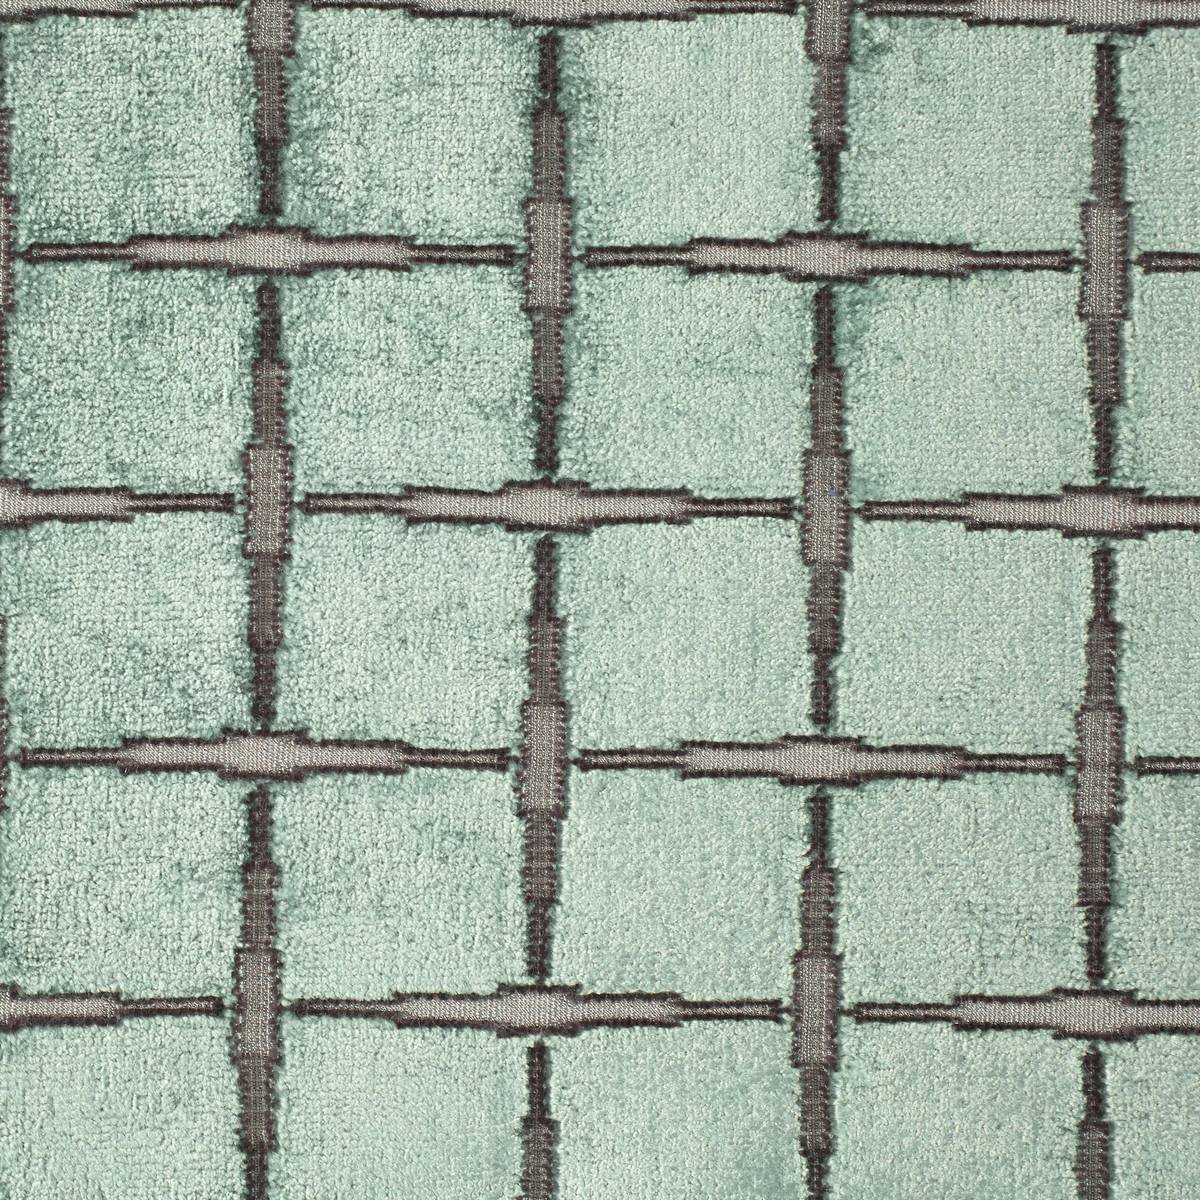 Tespi Square Teal/Silver Fabric by Zoffany